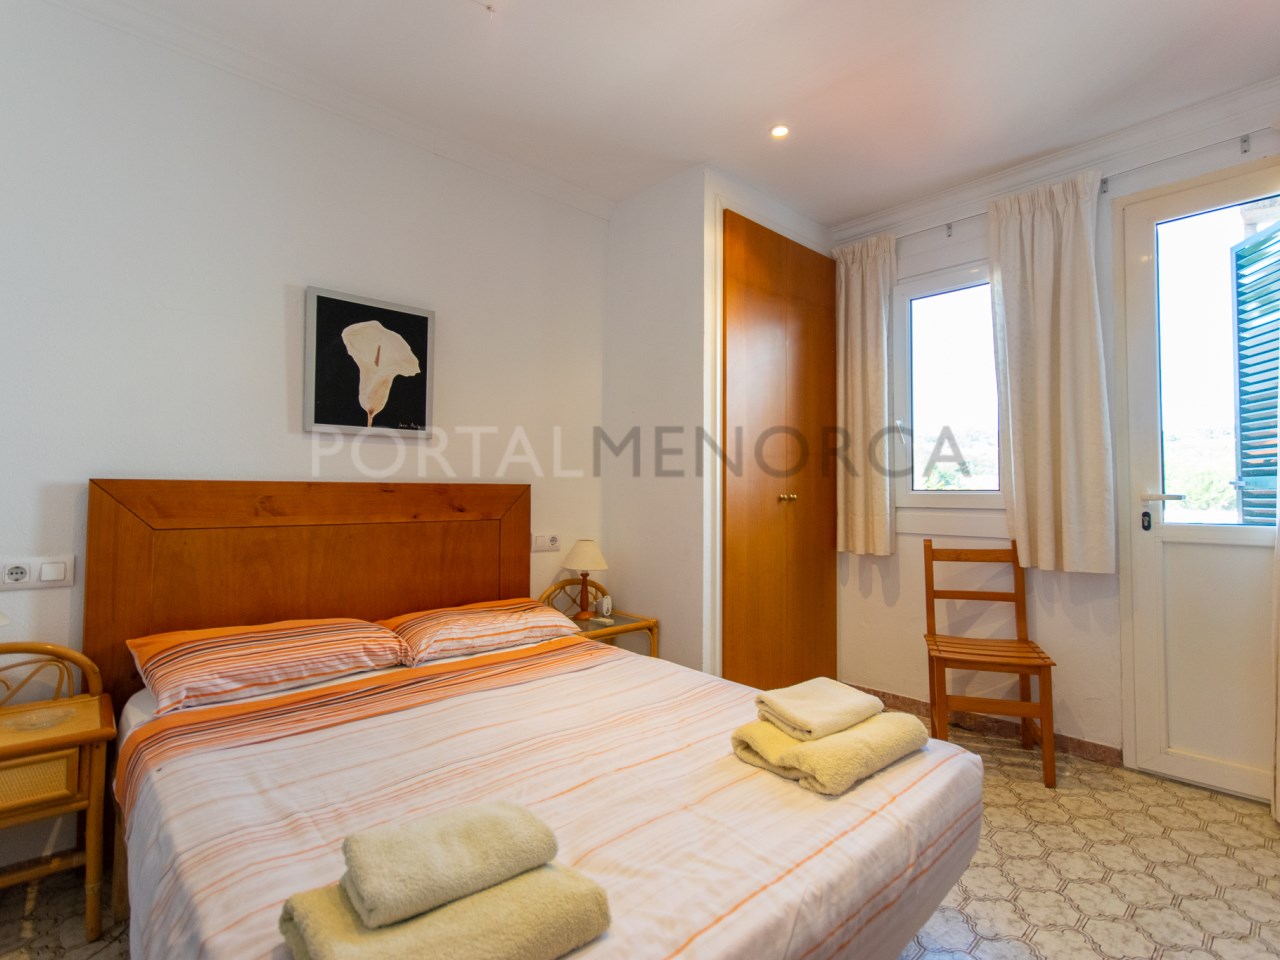 Double room with bathroom in villa with pool, sea views and tourist license in Addaia